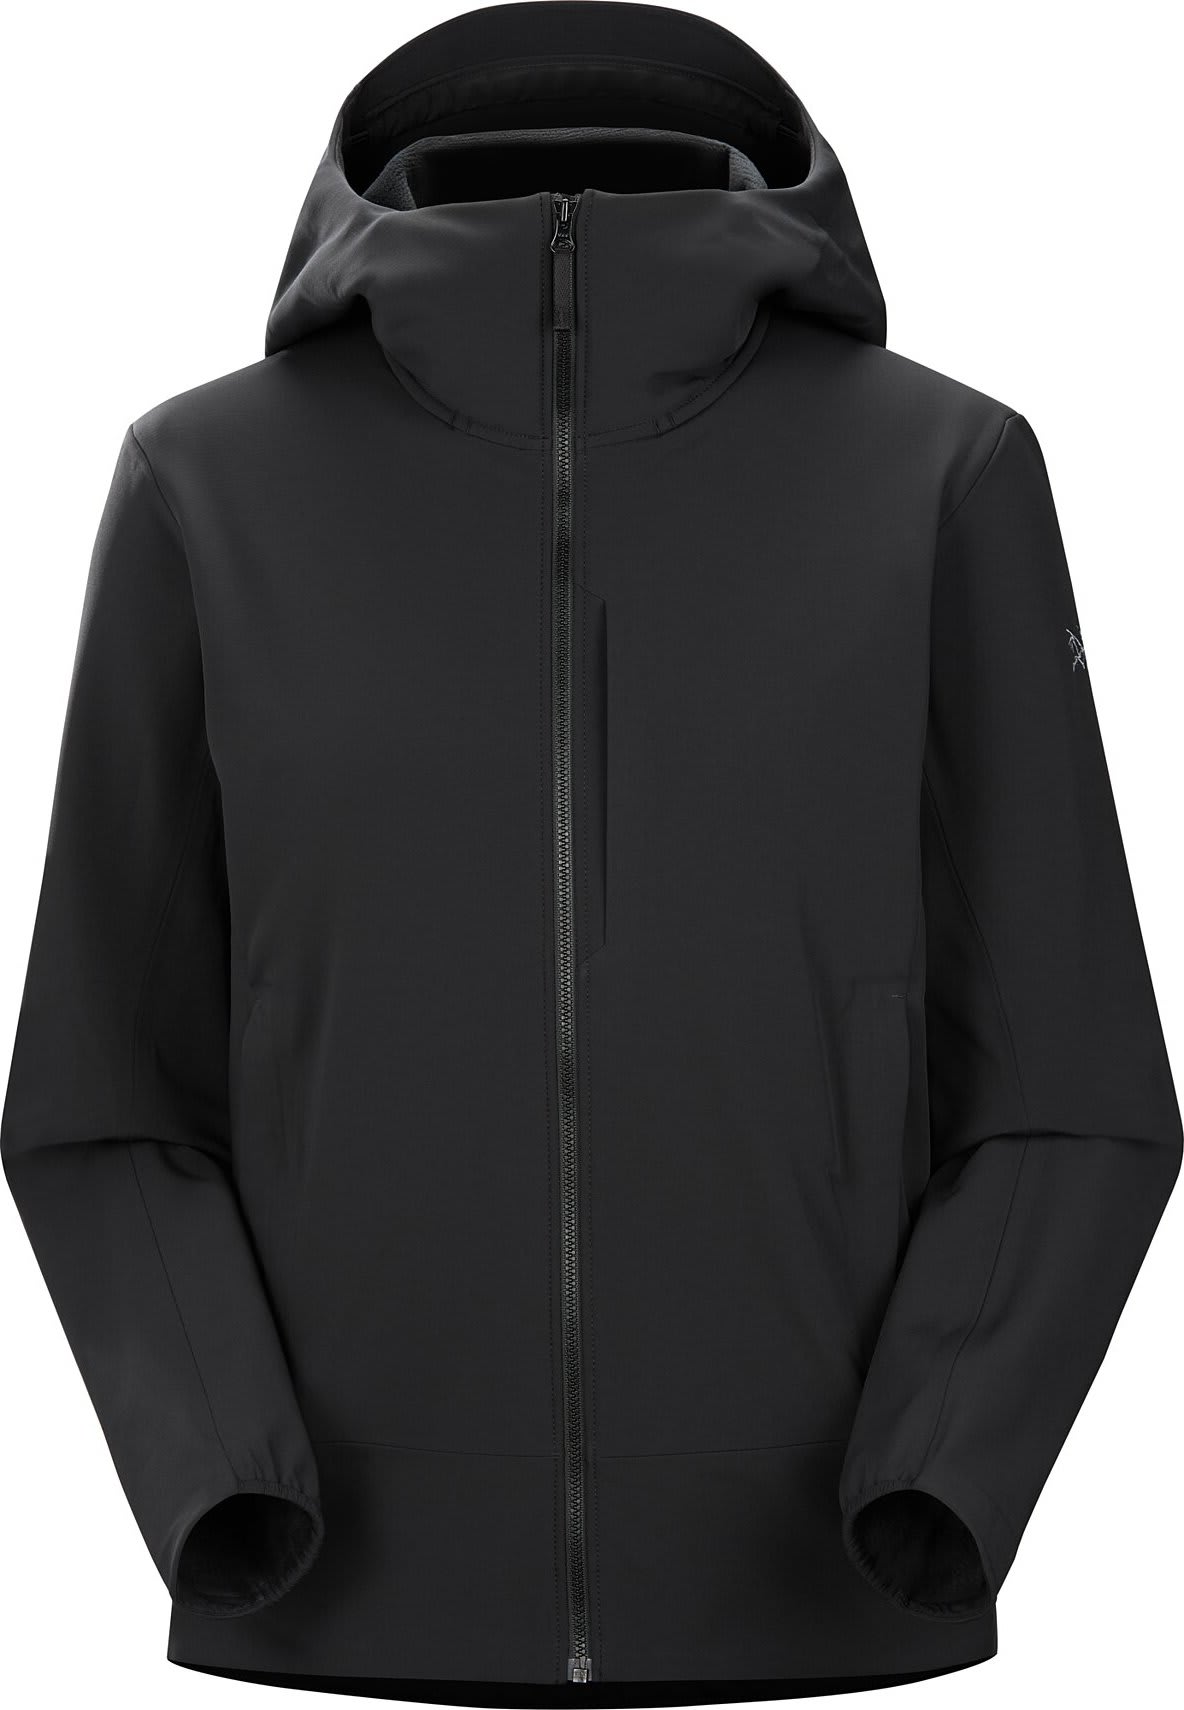 Buy Arc'teryx Women's Gamma Mixed Weather Hoody from Outnorth